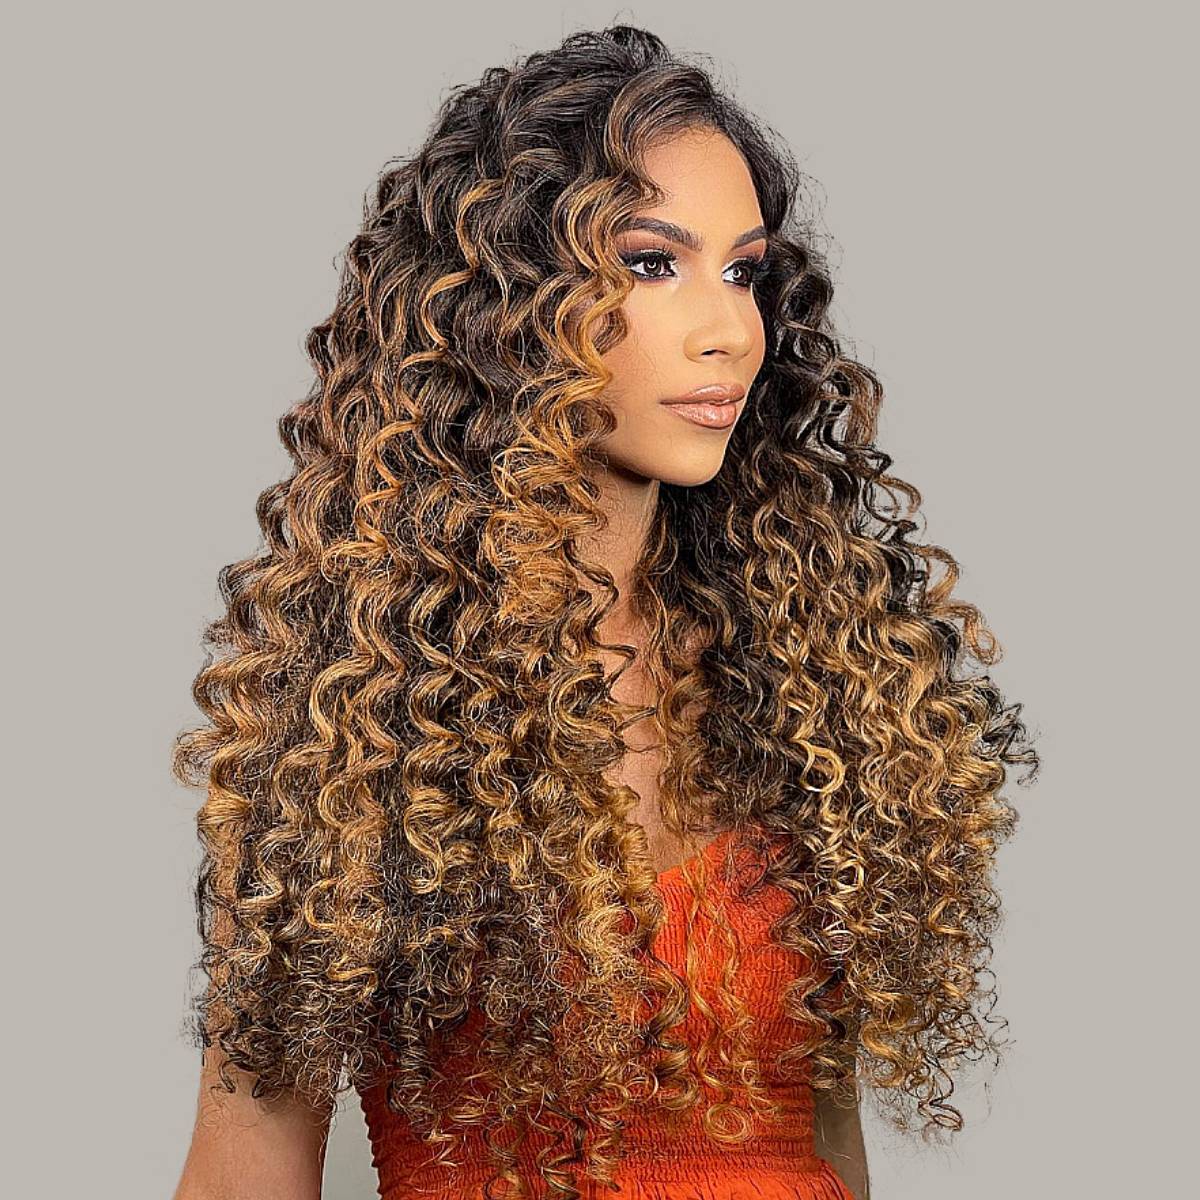 27 Easy Curly Hair Hairstyles for Curly Hair | All Things Hair US